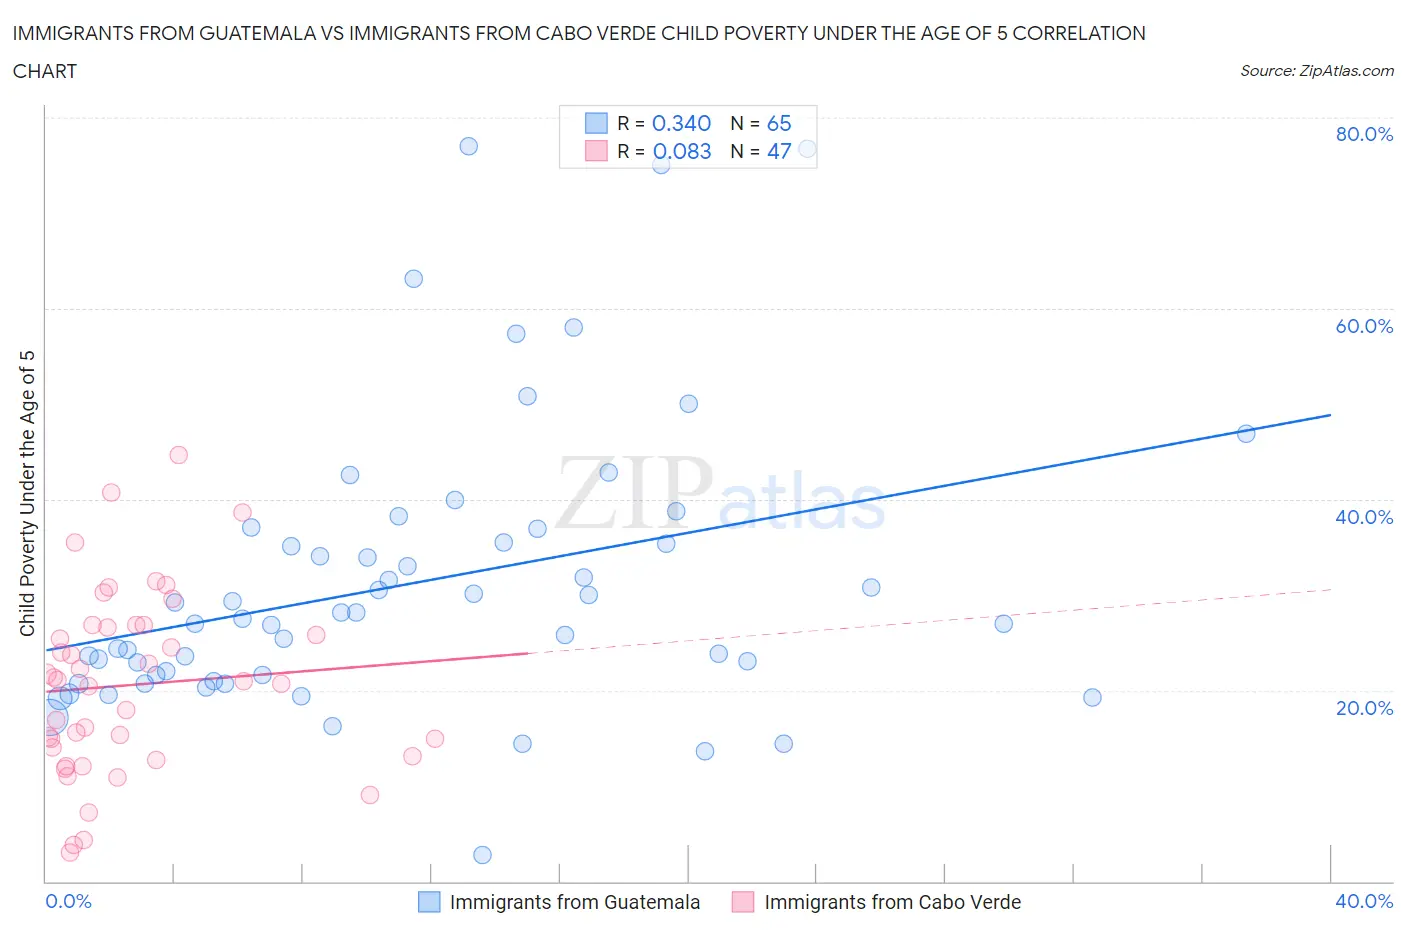 Immigrants from Guatemala vs Immigrants from Cabo Verde Child Poverty Under the Age of 5